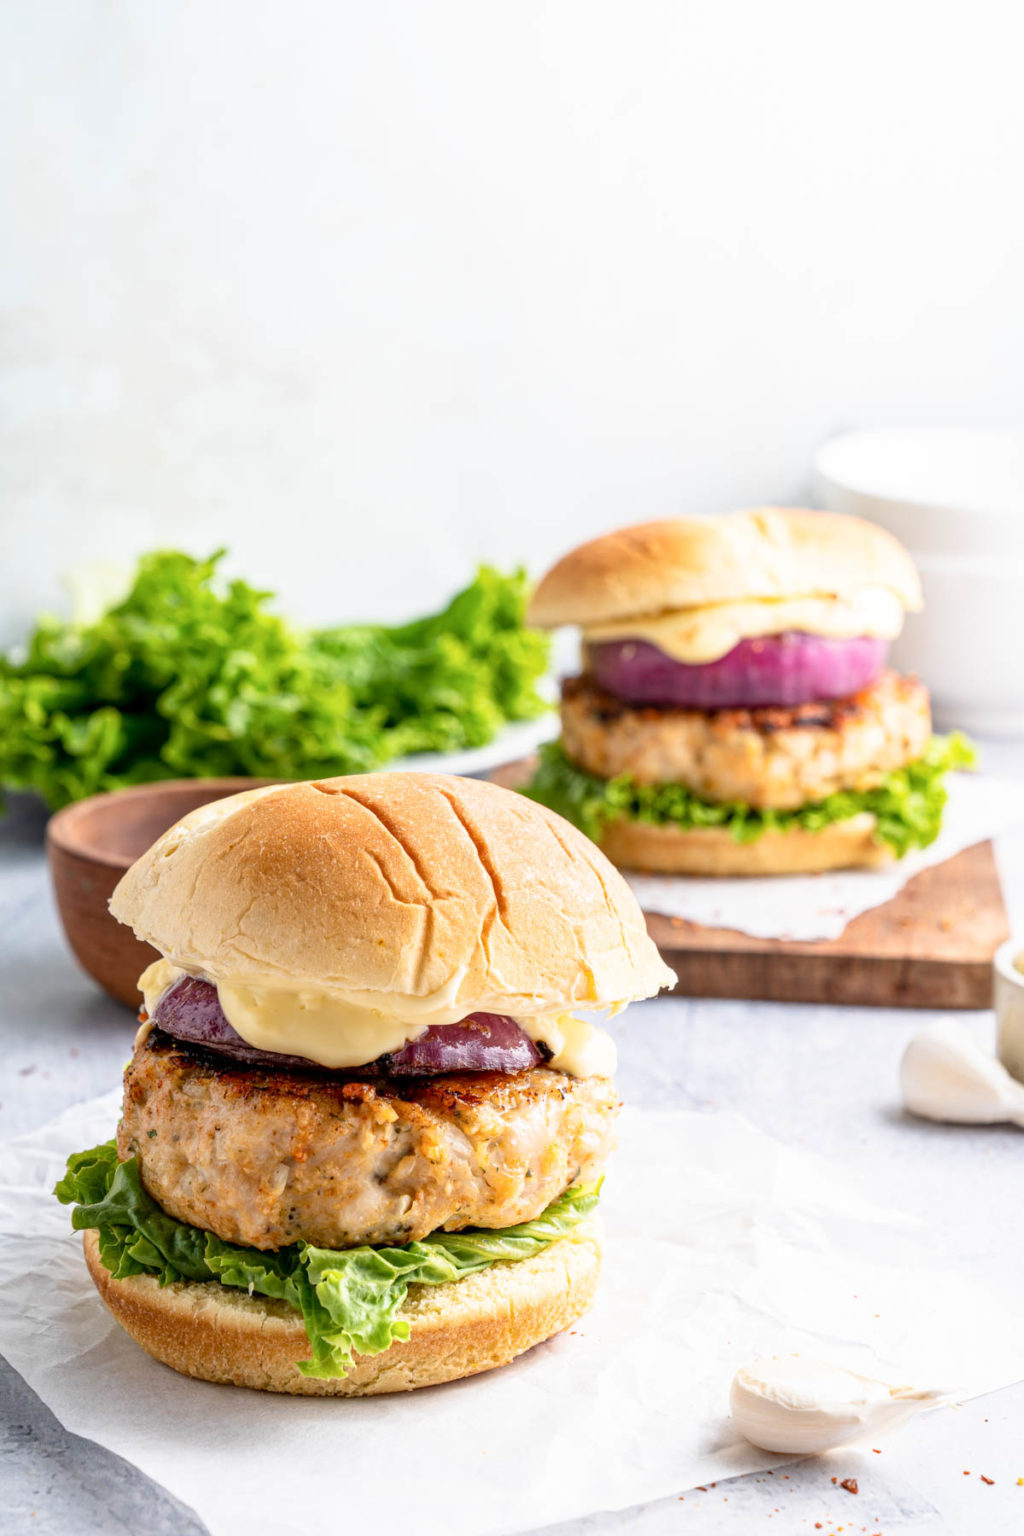 Ground Chicken Burger Recipe - Soulfully Made